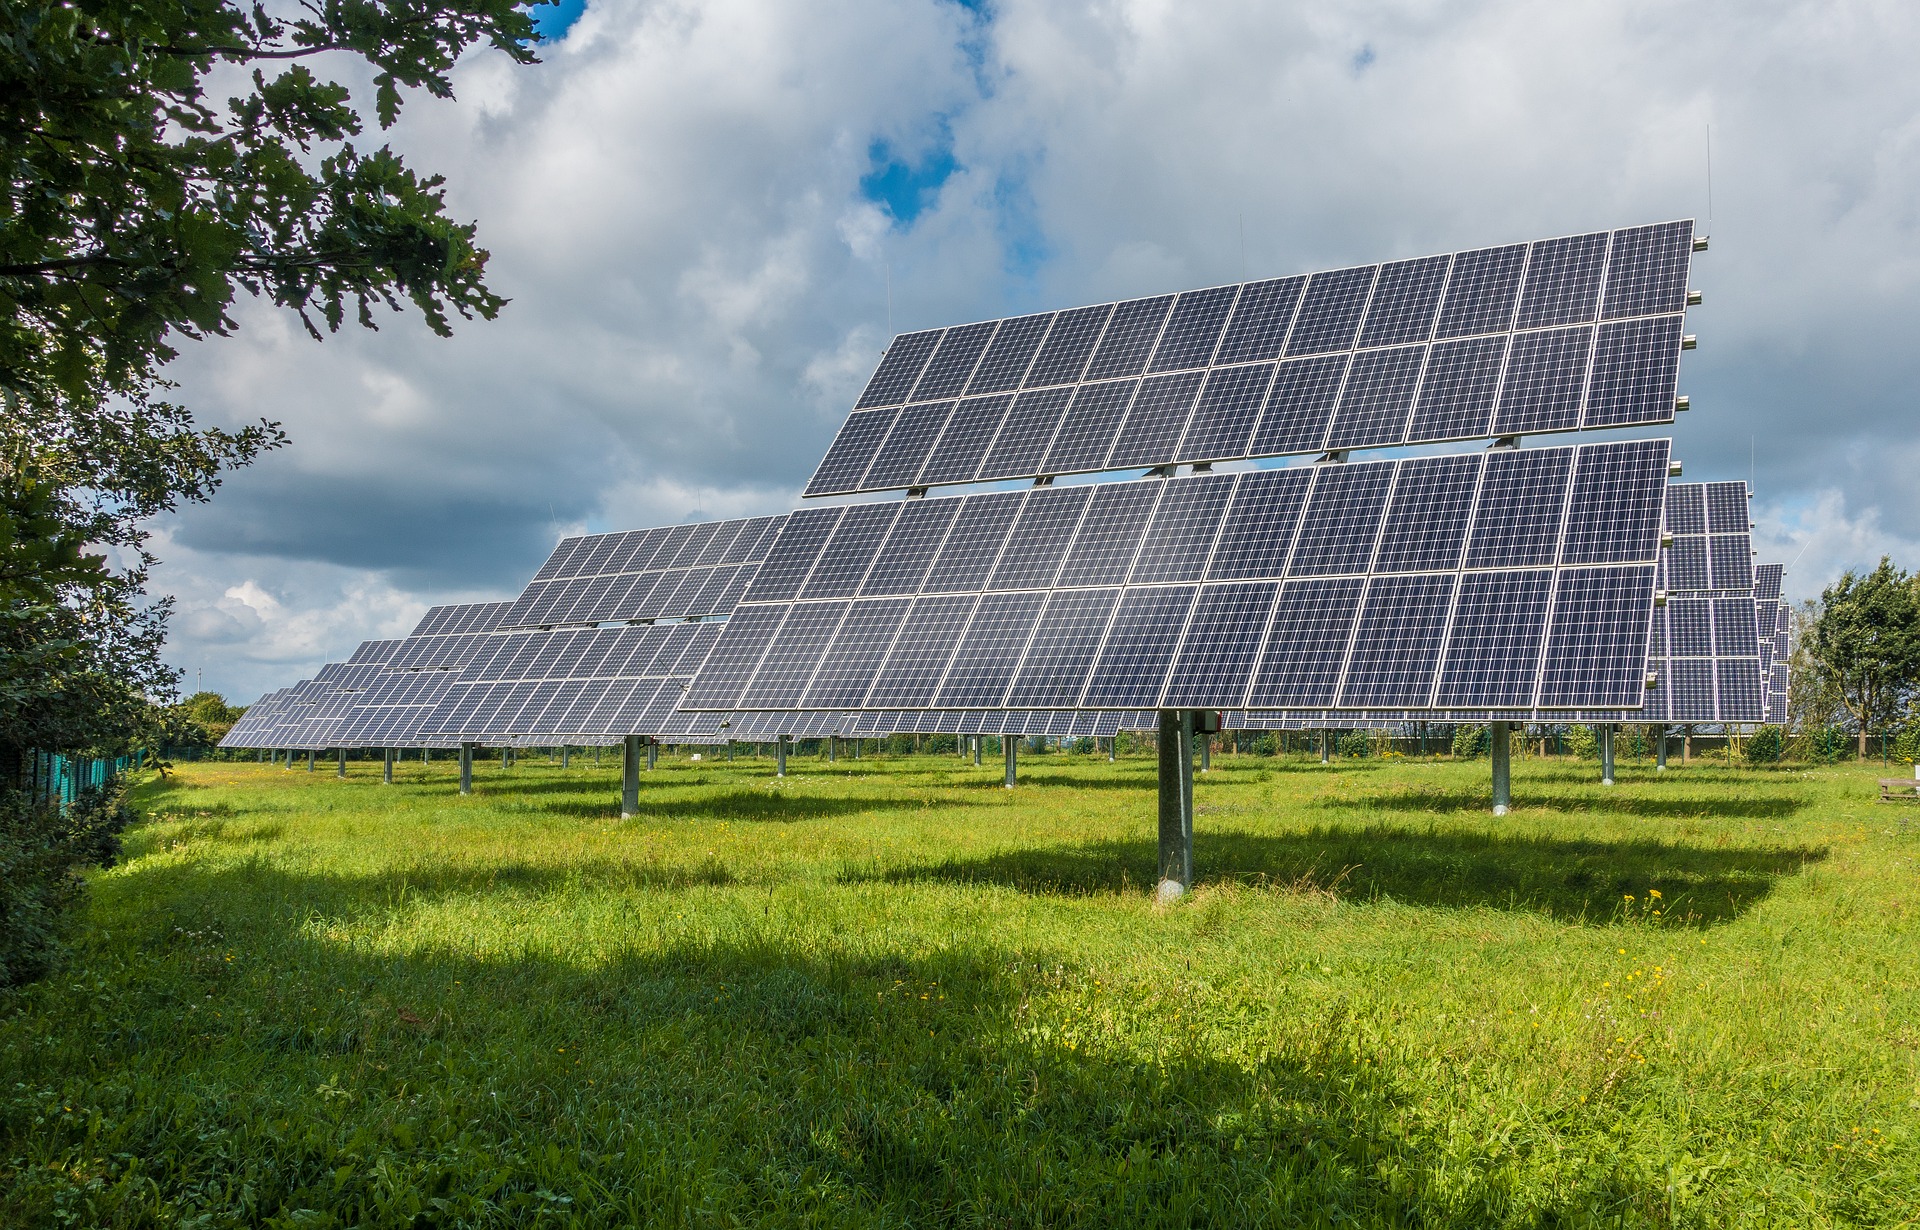 Indonesia to develop solar panel parks in its eastern regions